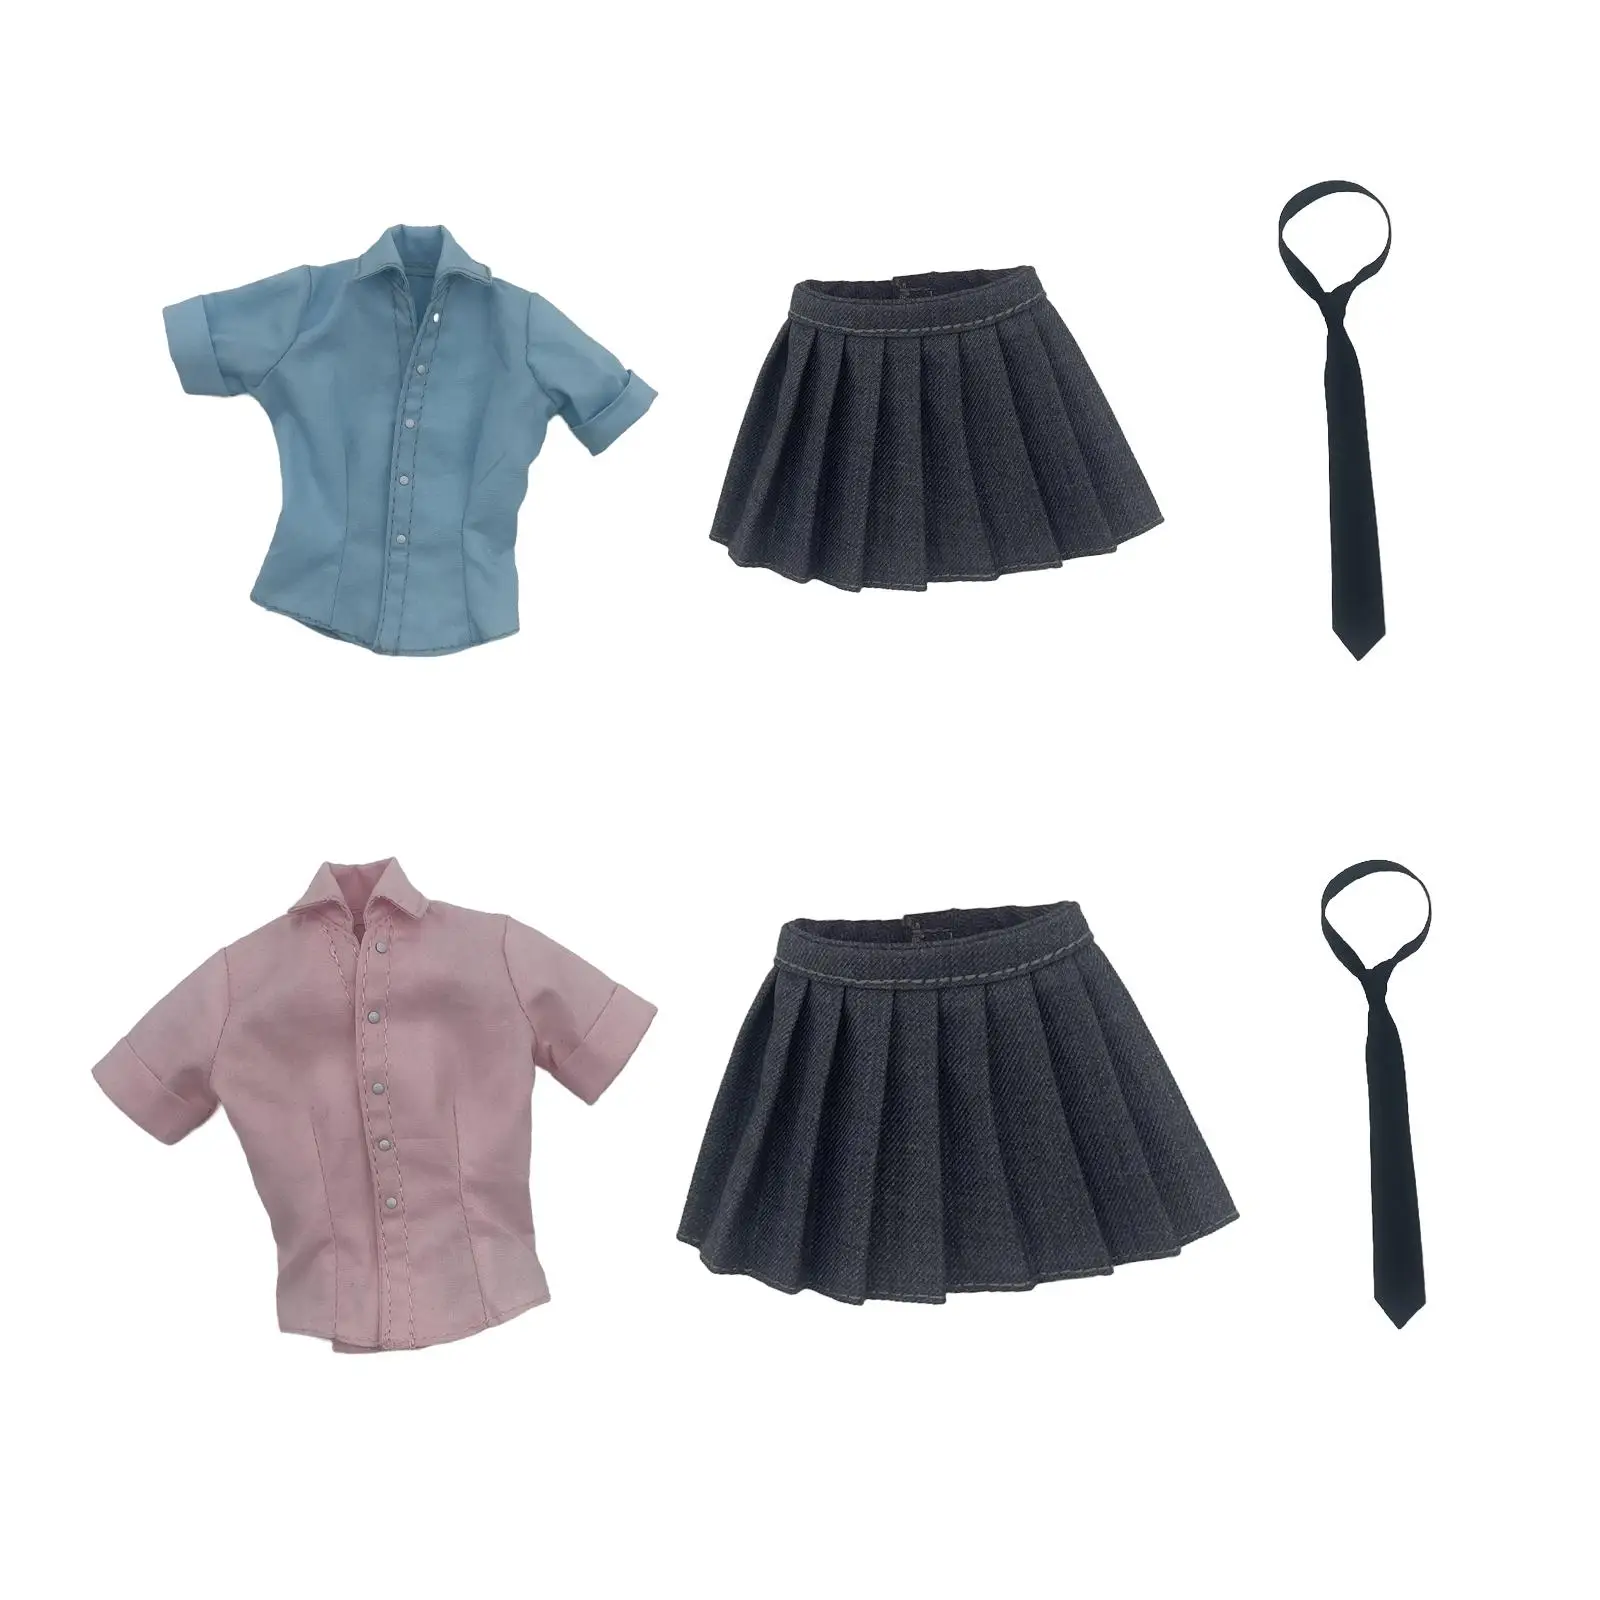 Action Figures Skirt Pretend Play Toy Stylish Uniform 1/6 Scale Female Shirt